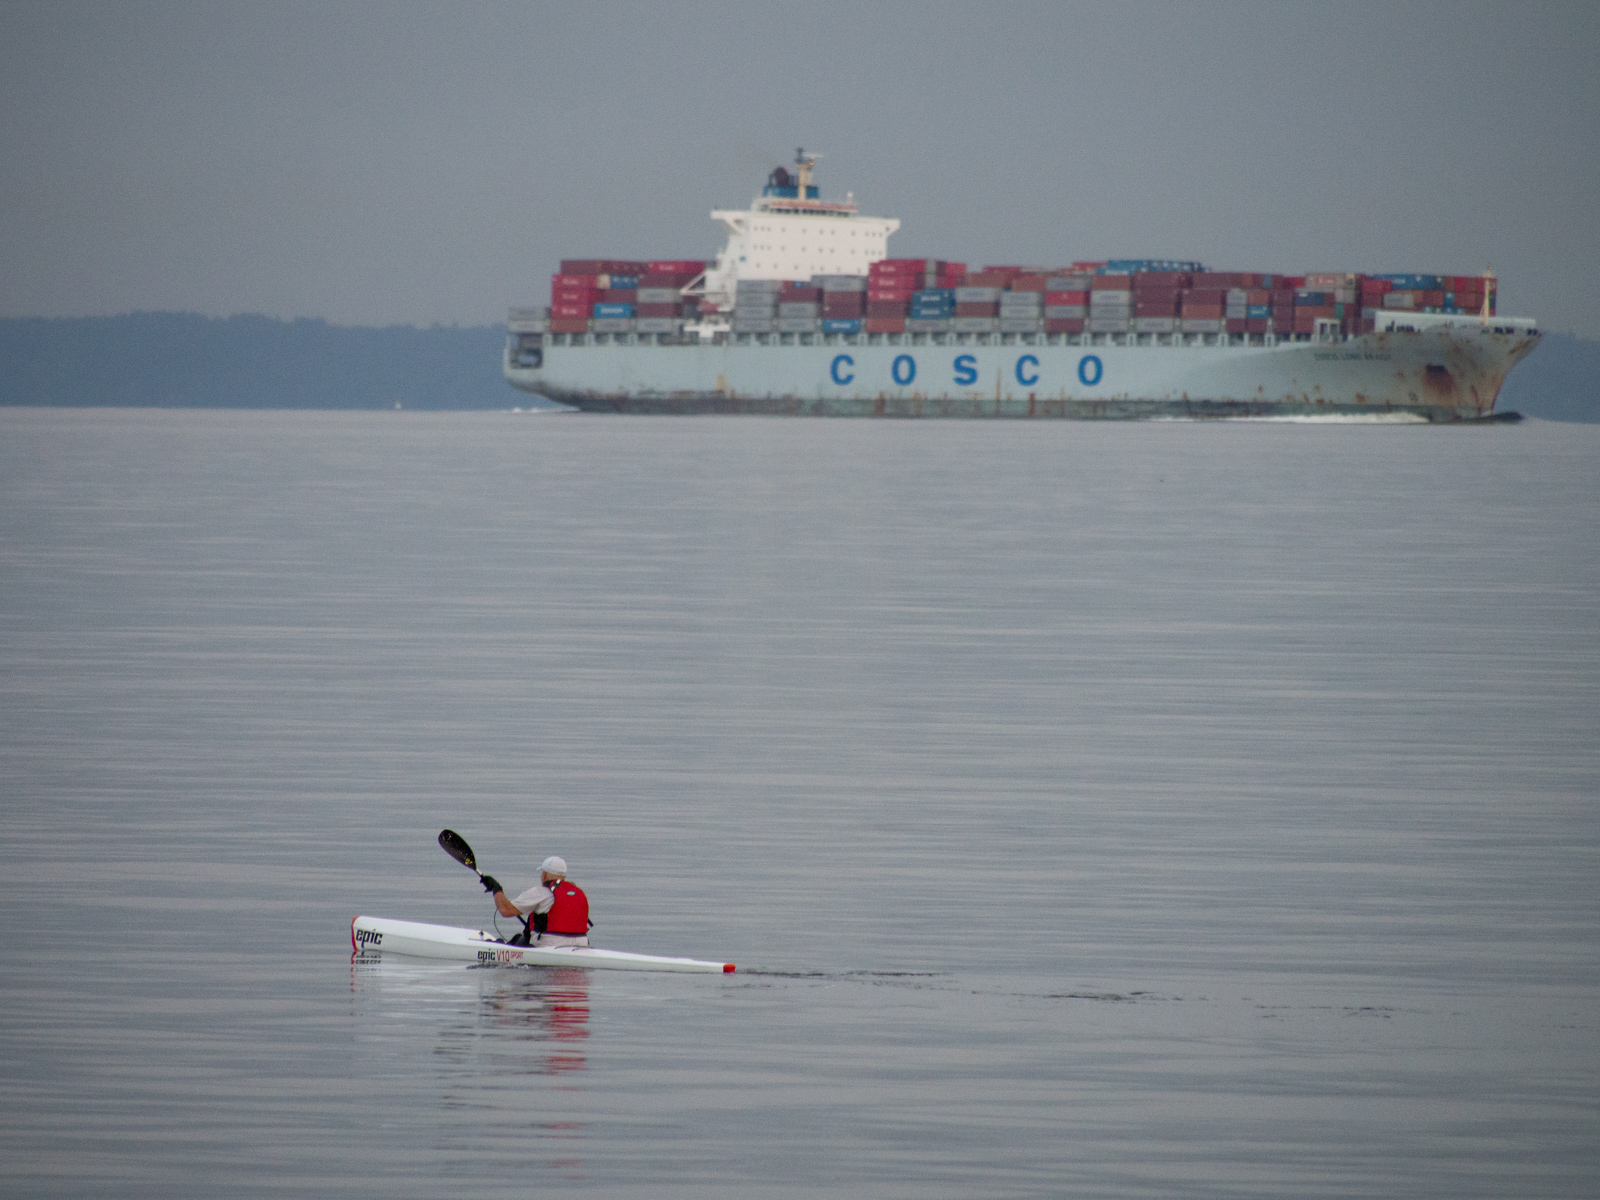 Kayaker on Puget Sound with Cosco Container Ship